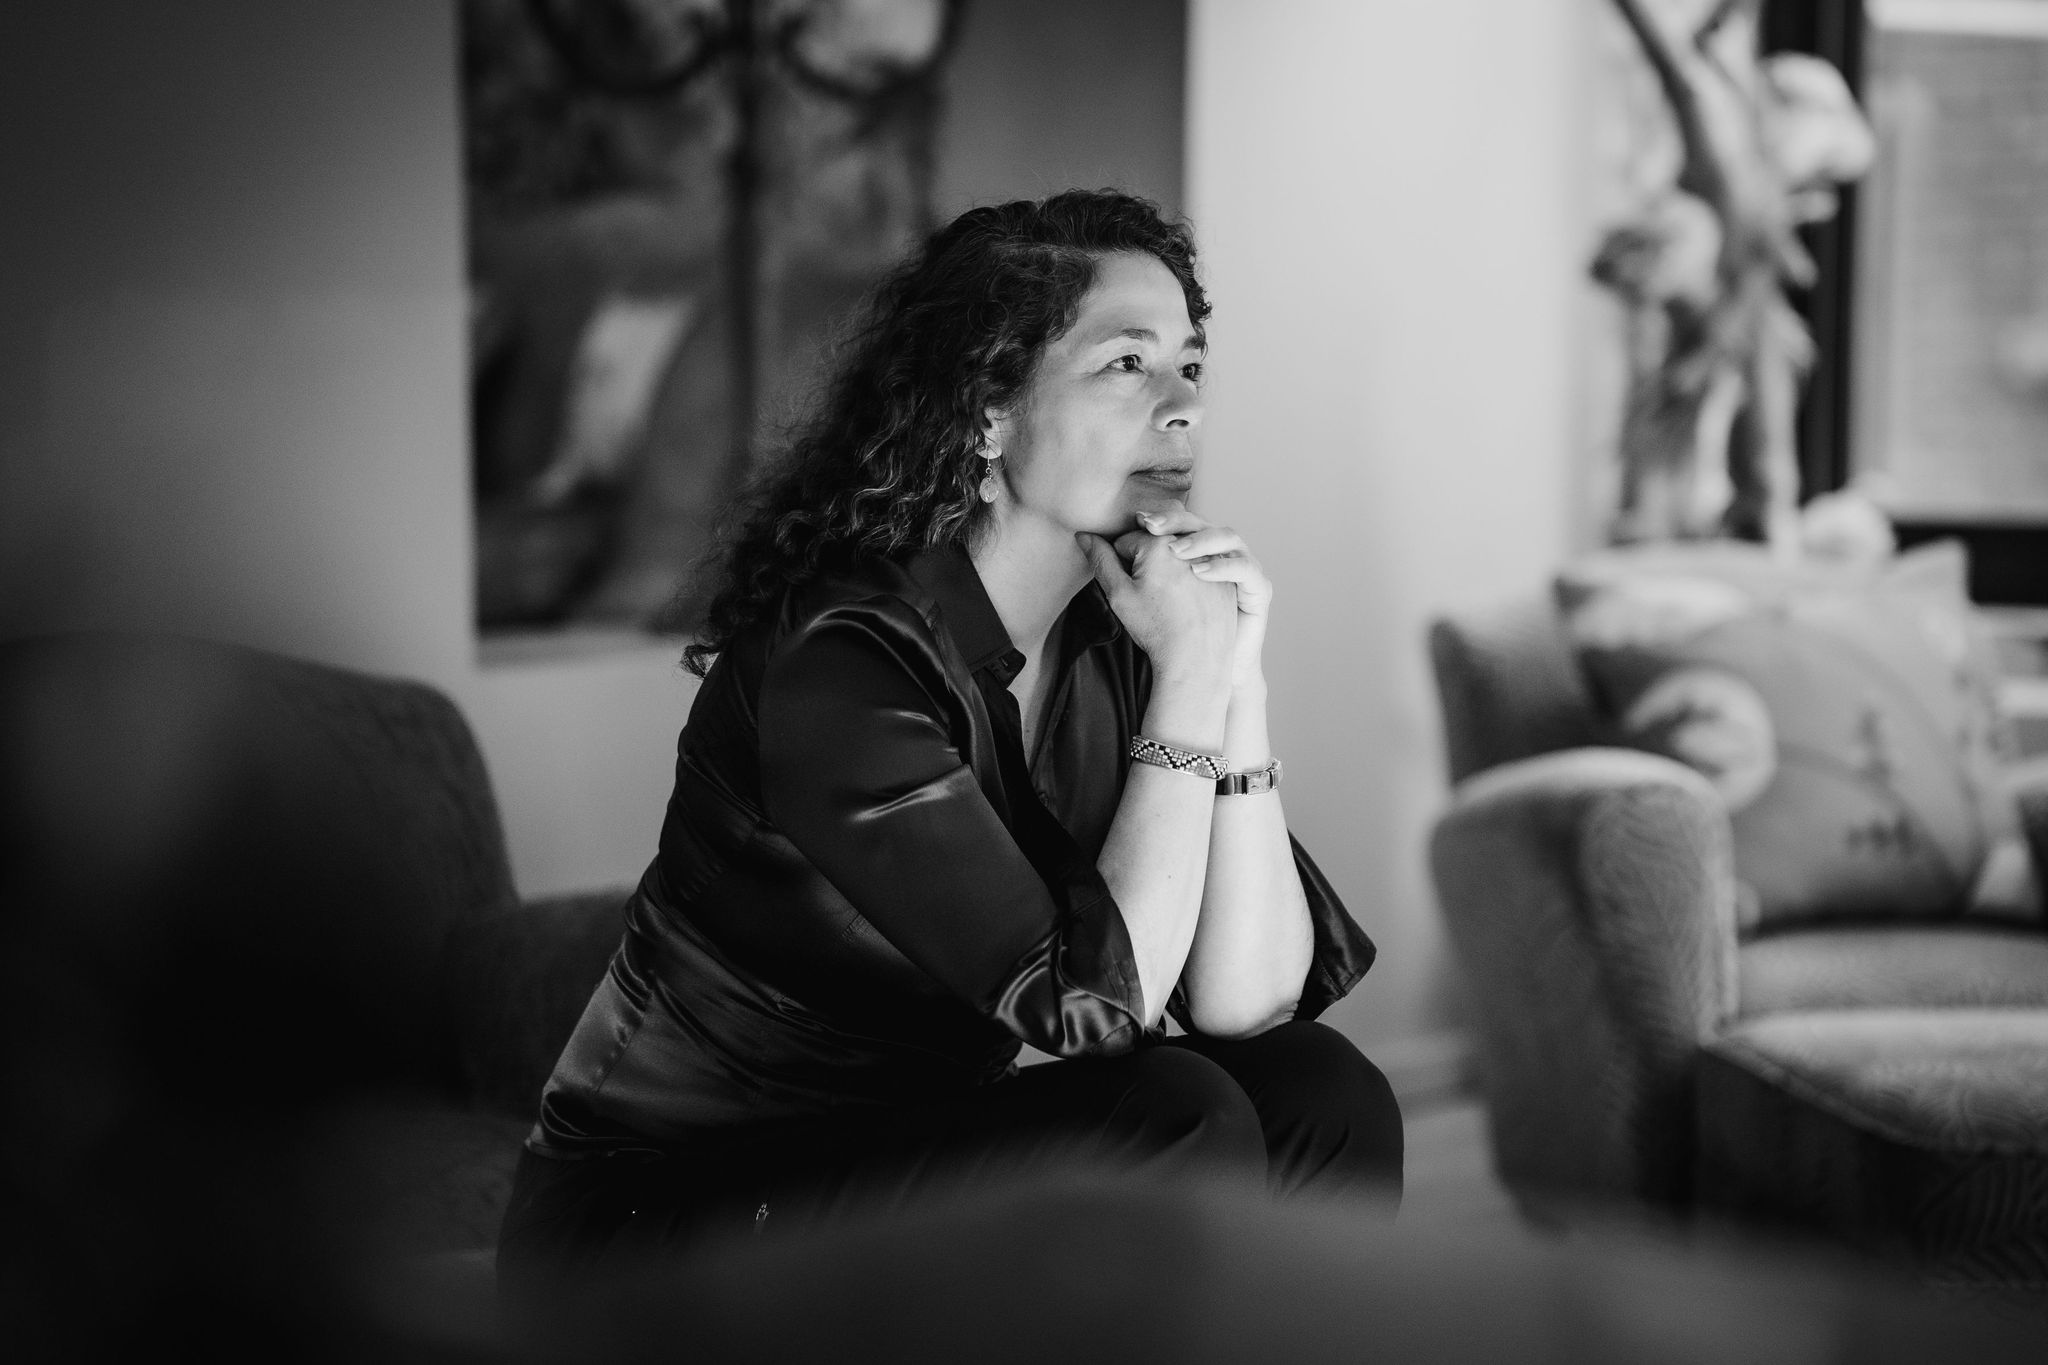 Sandra Laronde sits on a couch with art behind her, her hands drawn together in fists at her chin, looking out to the right. Black and white photo.